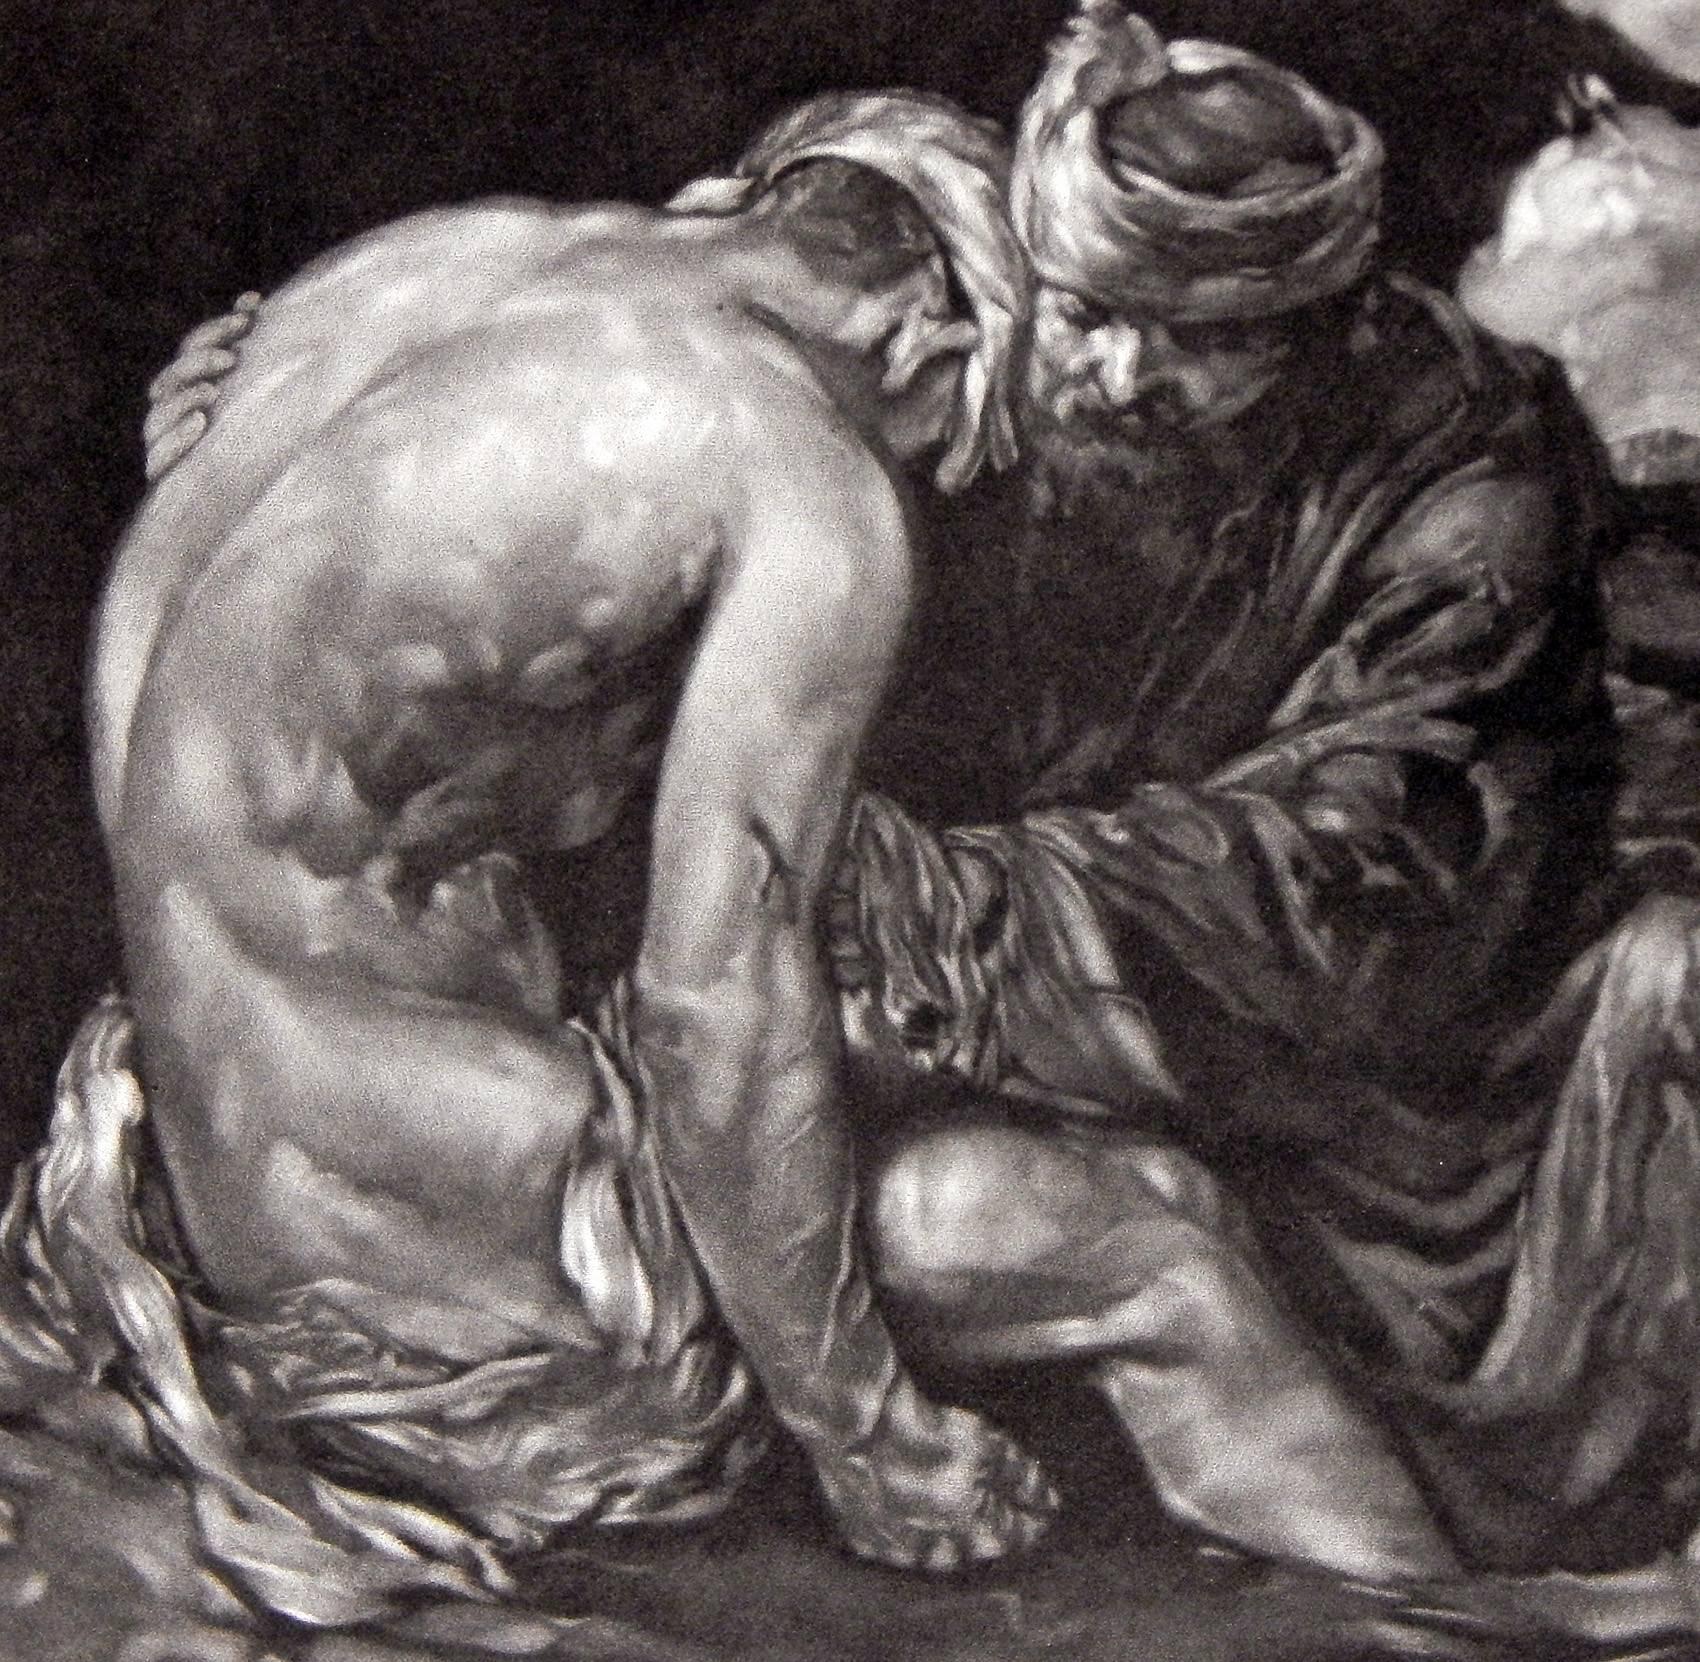 This extraordinary and rare mezzotint by Robert Charles Peter, a British artist, depicts a nude male figure, beaten and worn, being comforted and helped by the proverbial Good Samaritan. The artist's mastery of the human figure, in all its beauty